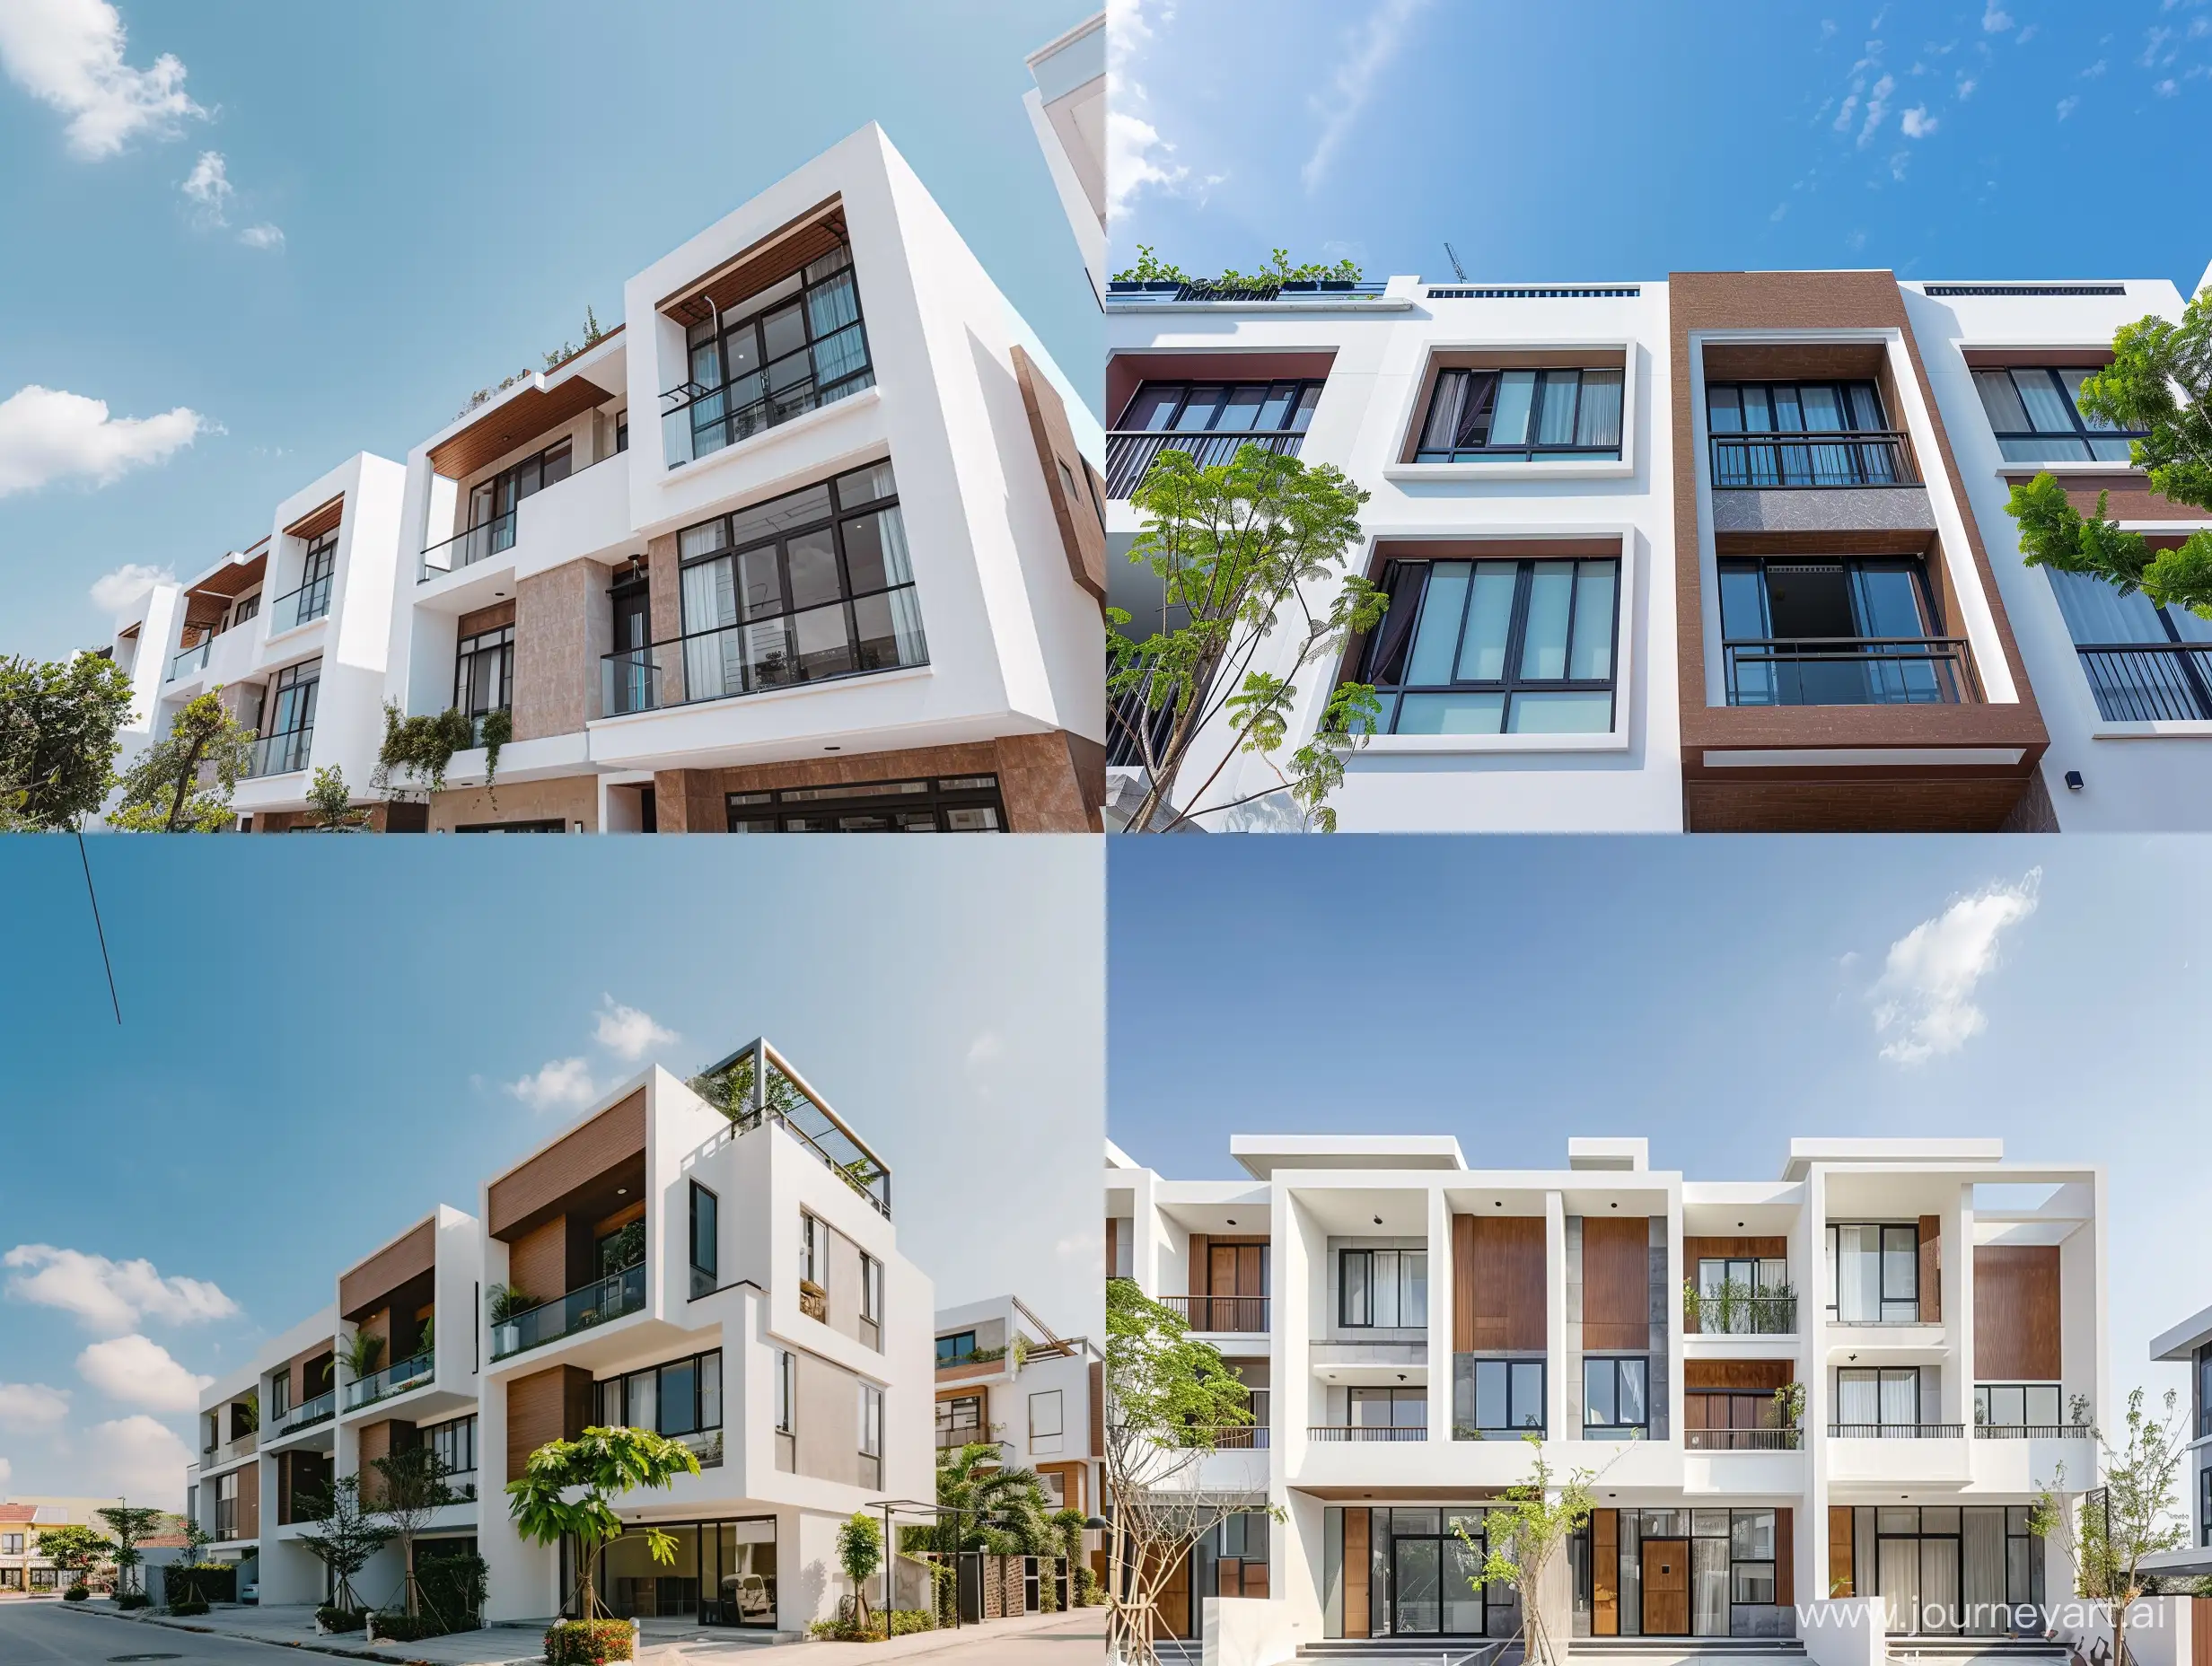 Reality photography, townhouse in vietnam, 5 meter frontage, modern style, 3 stories high, nice weather, blue sky without clouds, white tones combine brown and concrete